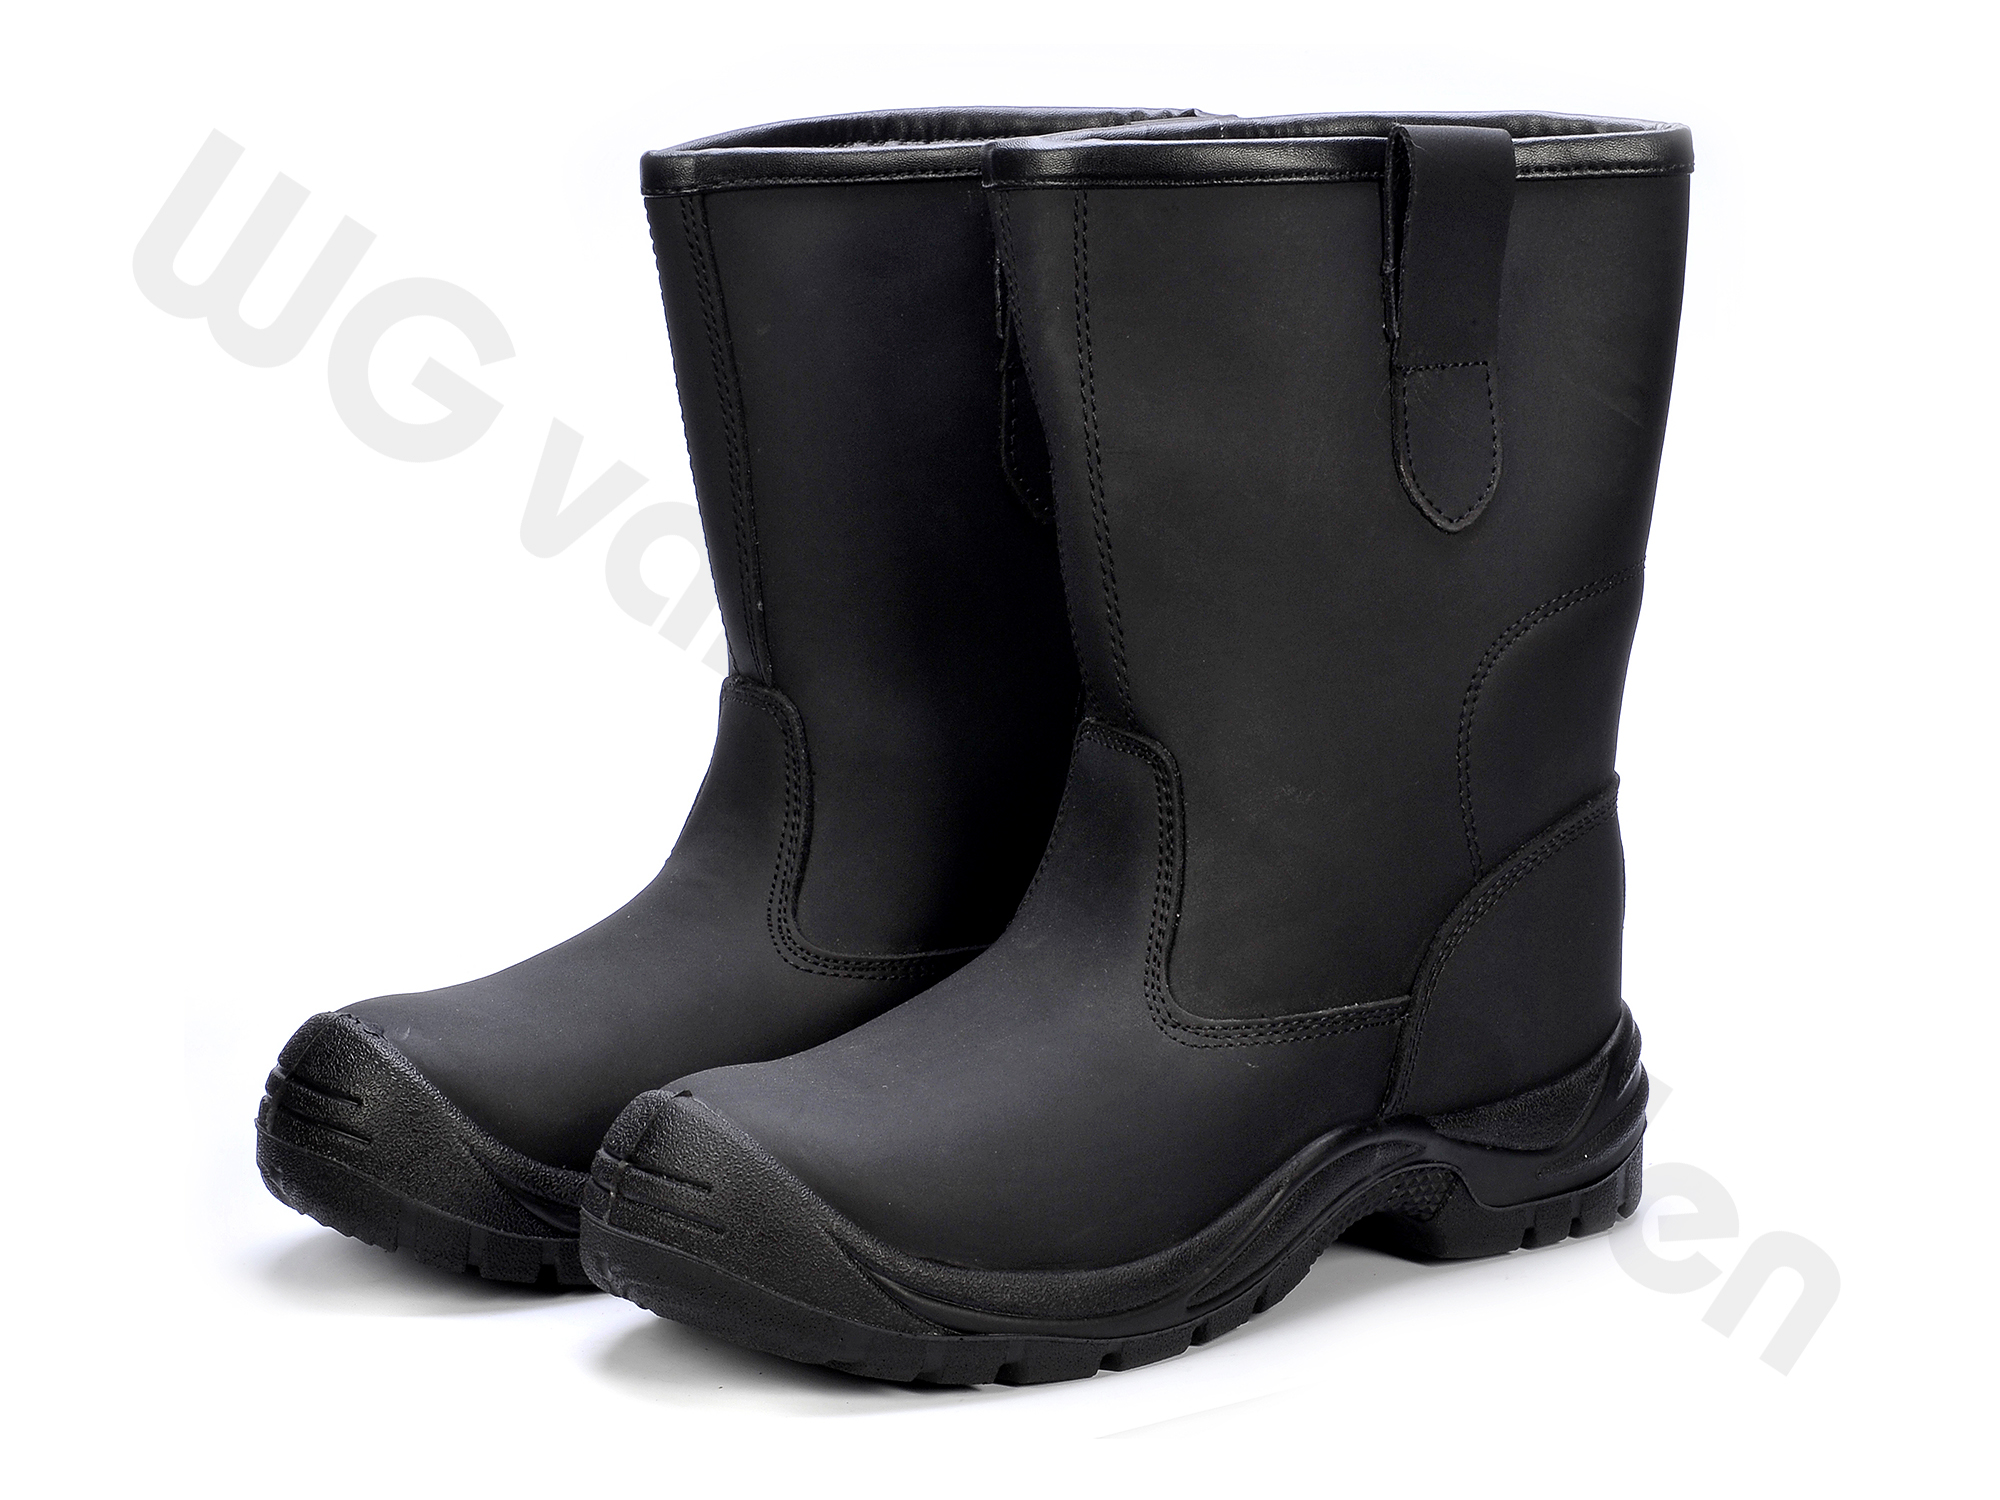 880353 BOOTS SAFETY S3 LEATHER W/STEEL TOE AND LINING 42/27CM